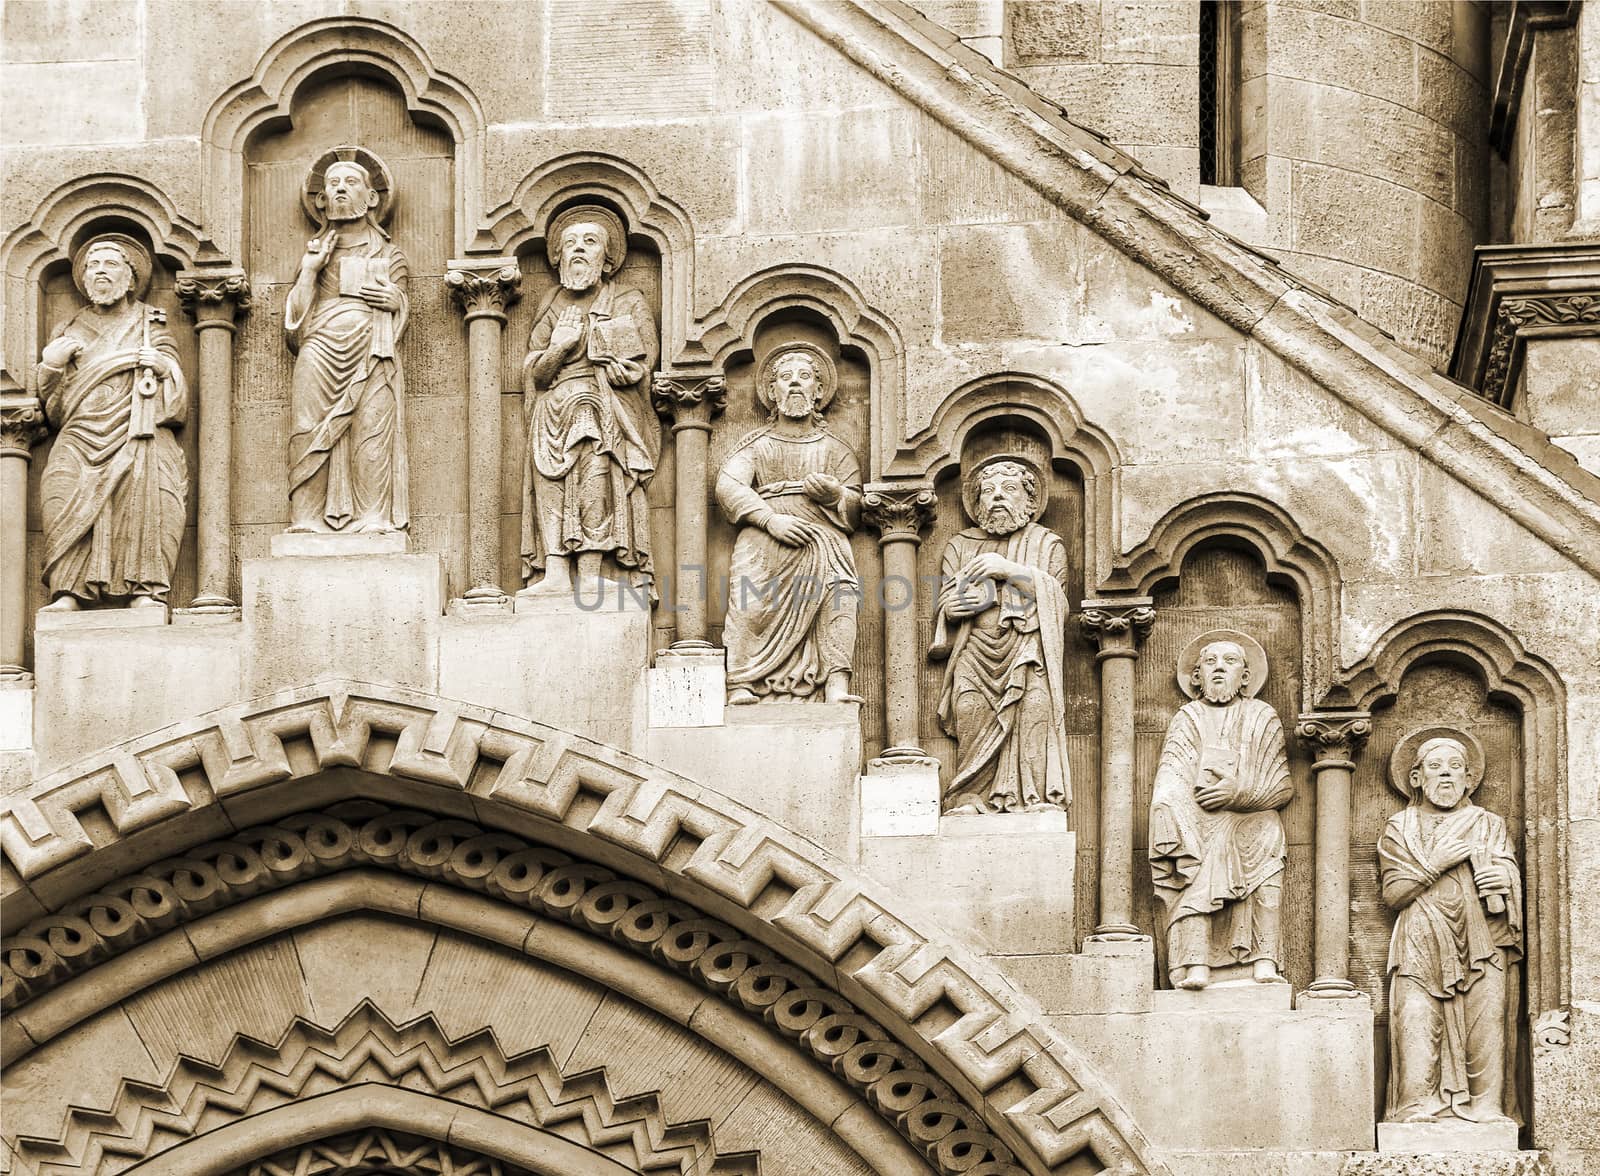 Facade of Jak Church in Budapest, Hungary